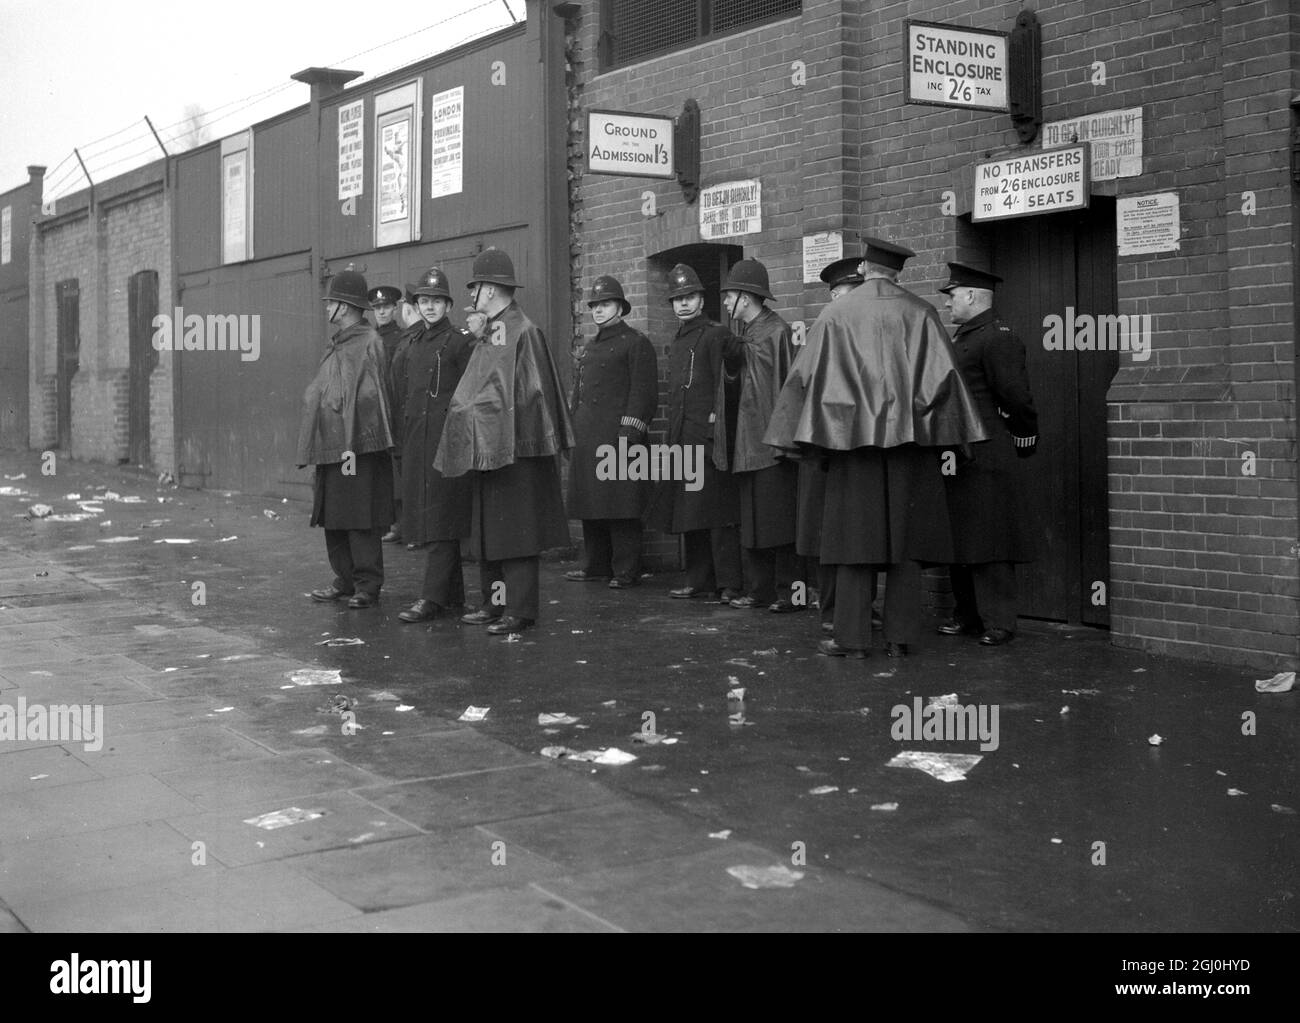 Arsenal played Tottenham Hotspurs at Highbury in the 3rd Round Cup battle , the first time these two teams have met in a Cup game Arsenal supporters improvise umbrellas as they wait the start of game. 8 January 1949 Stock Photo